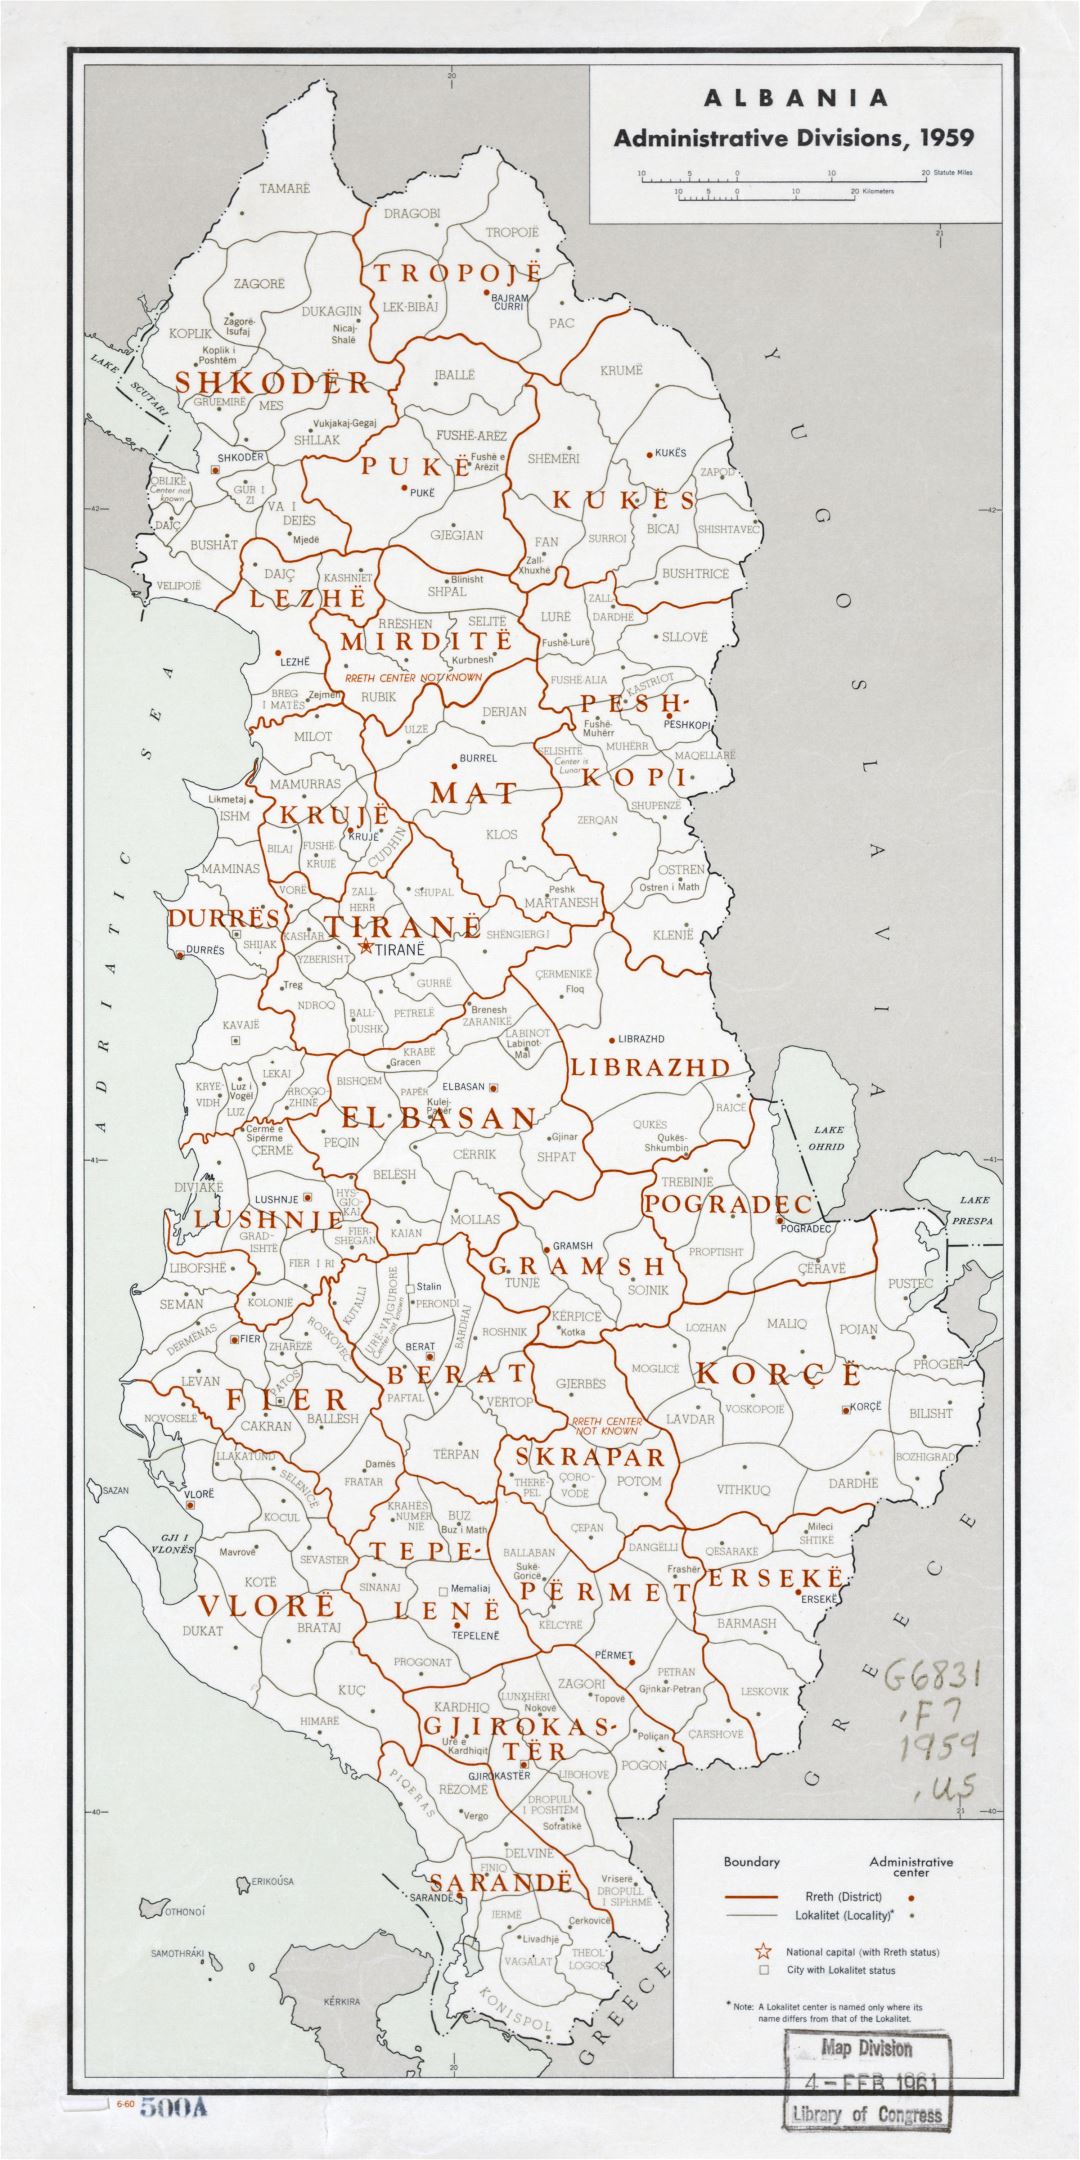 Large scale detailed administrative divisions map of Albania - 1959